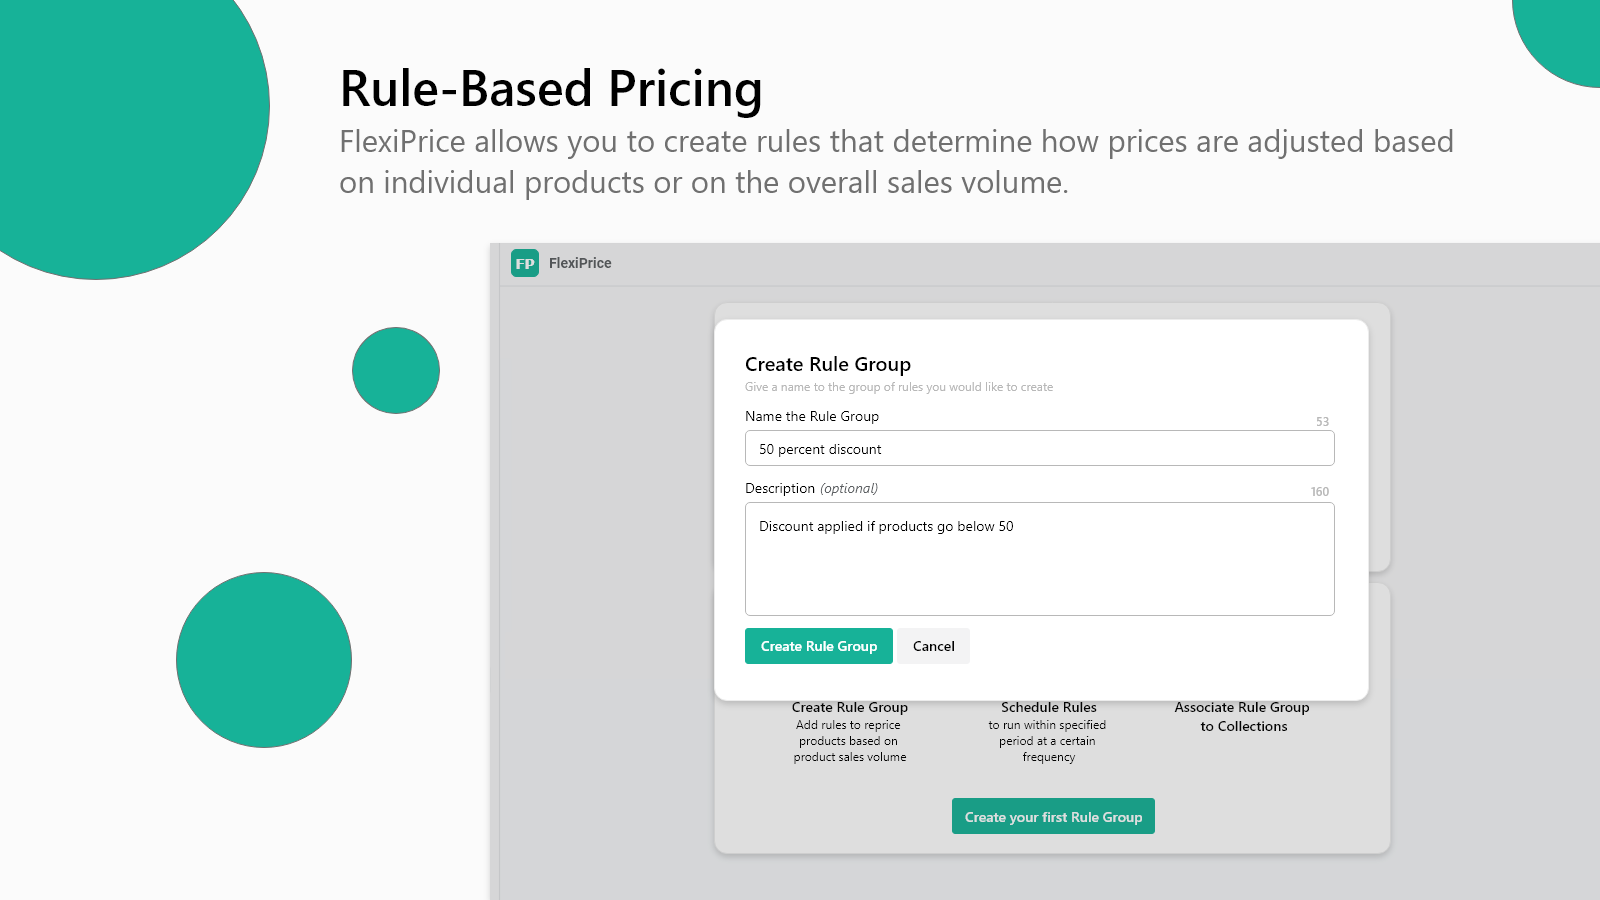 FlexiPrice - Rule Based Pricing